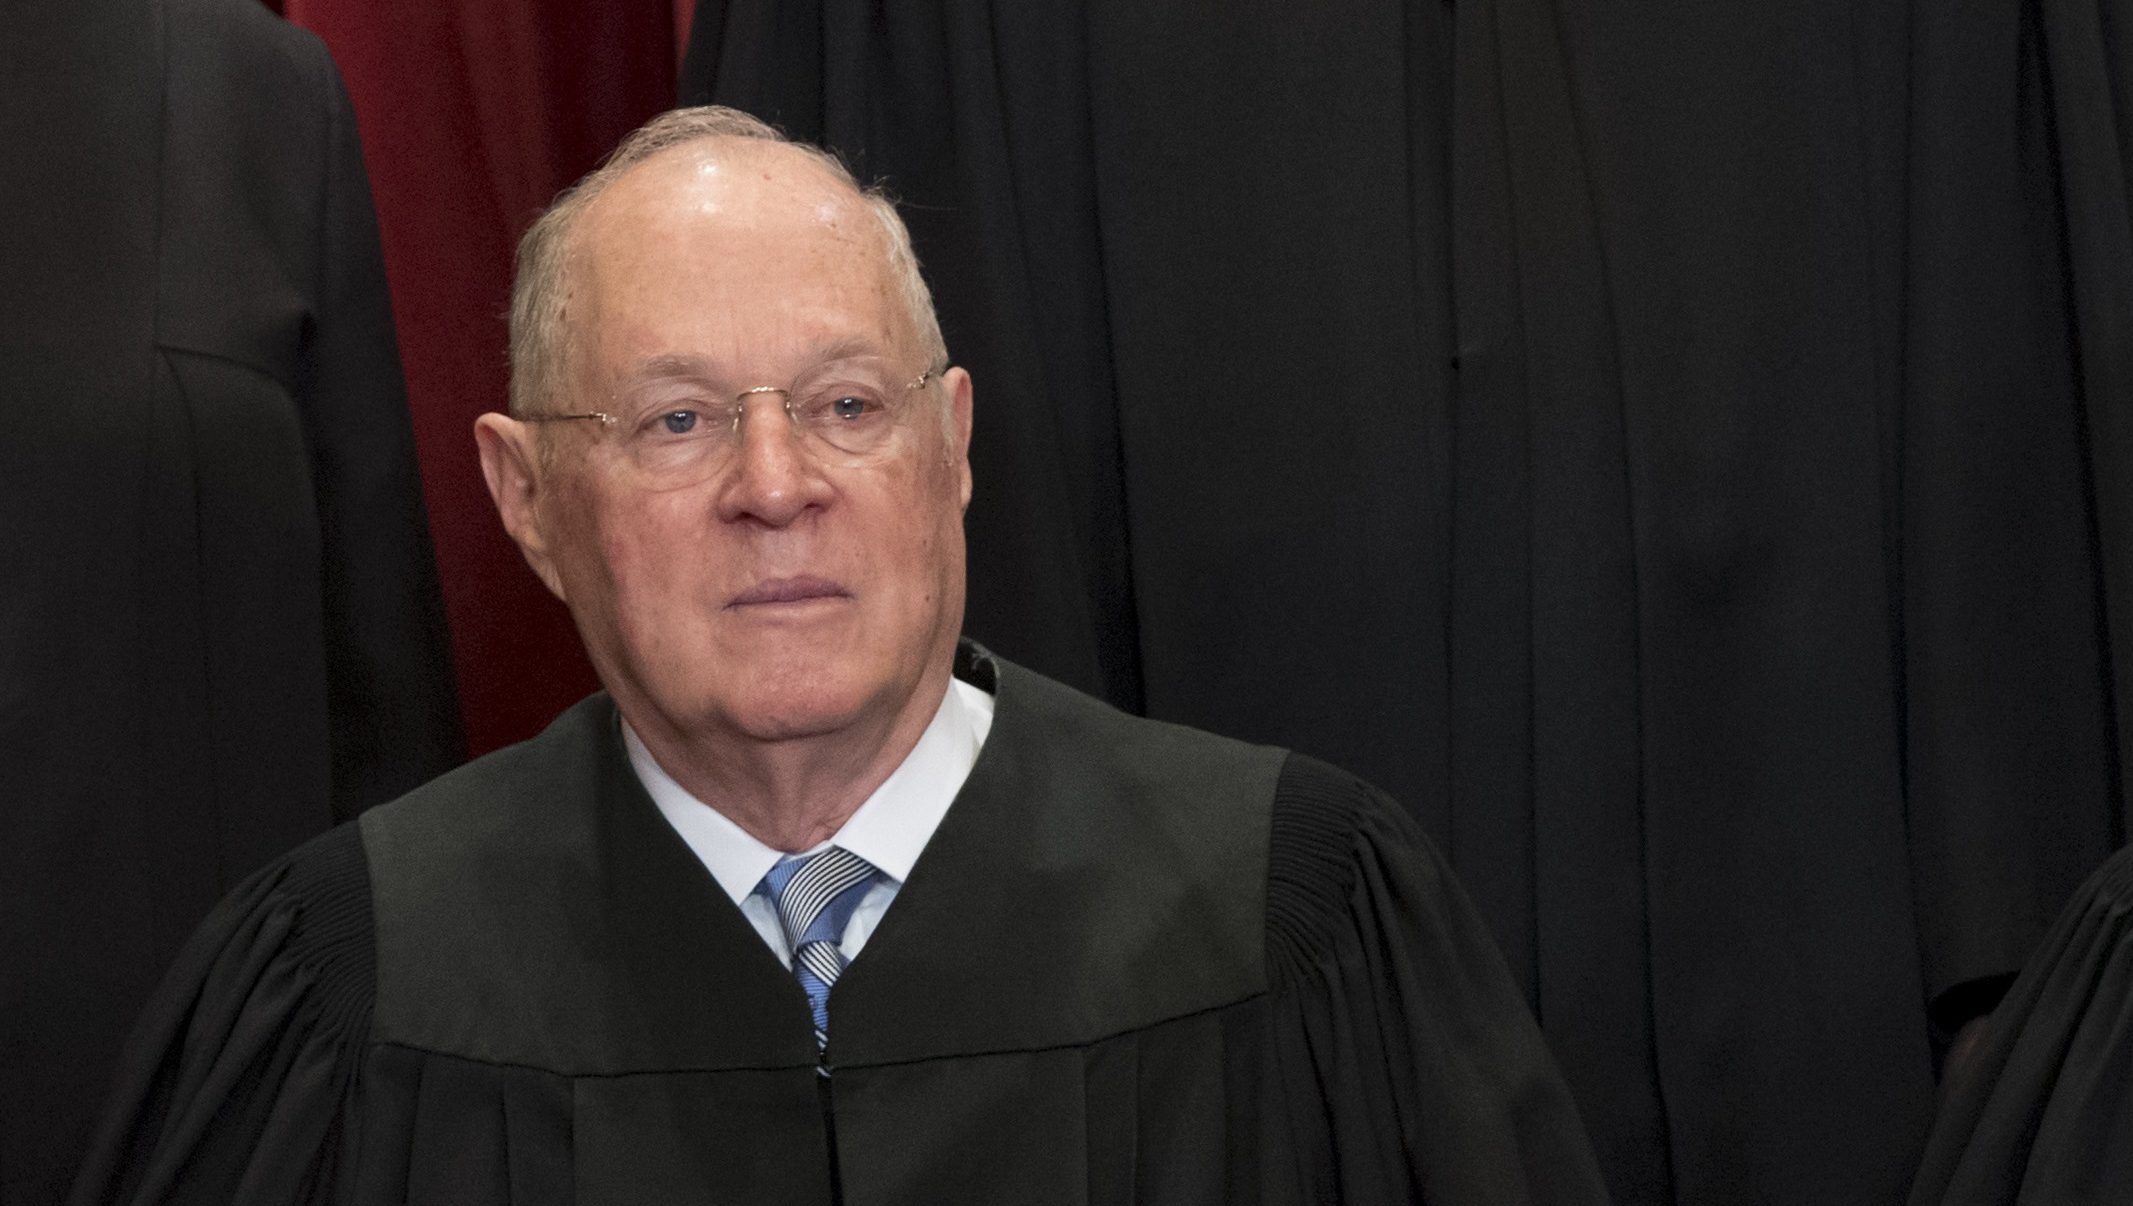 Anthony Kennedy Retirement 5 Fast Facts You Need To Know